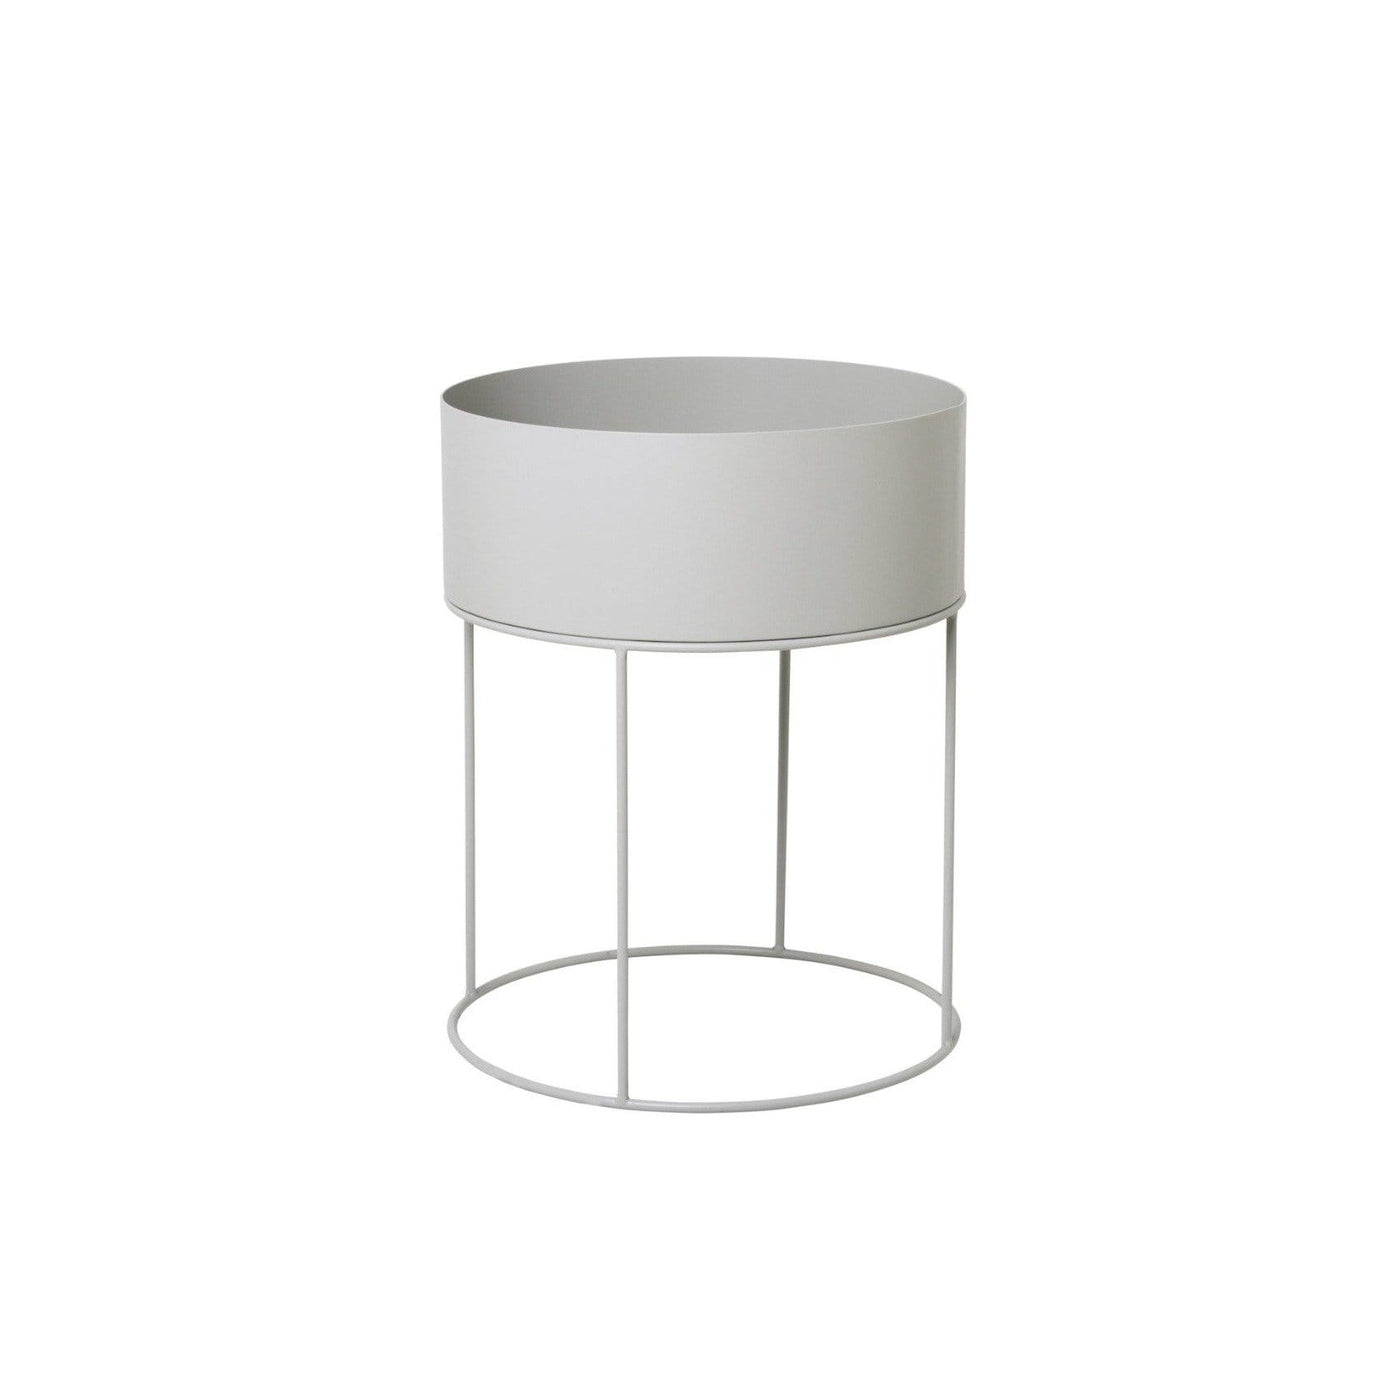 Ferm Living Plant Box round. Available from someday designs. #colour_light-grey